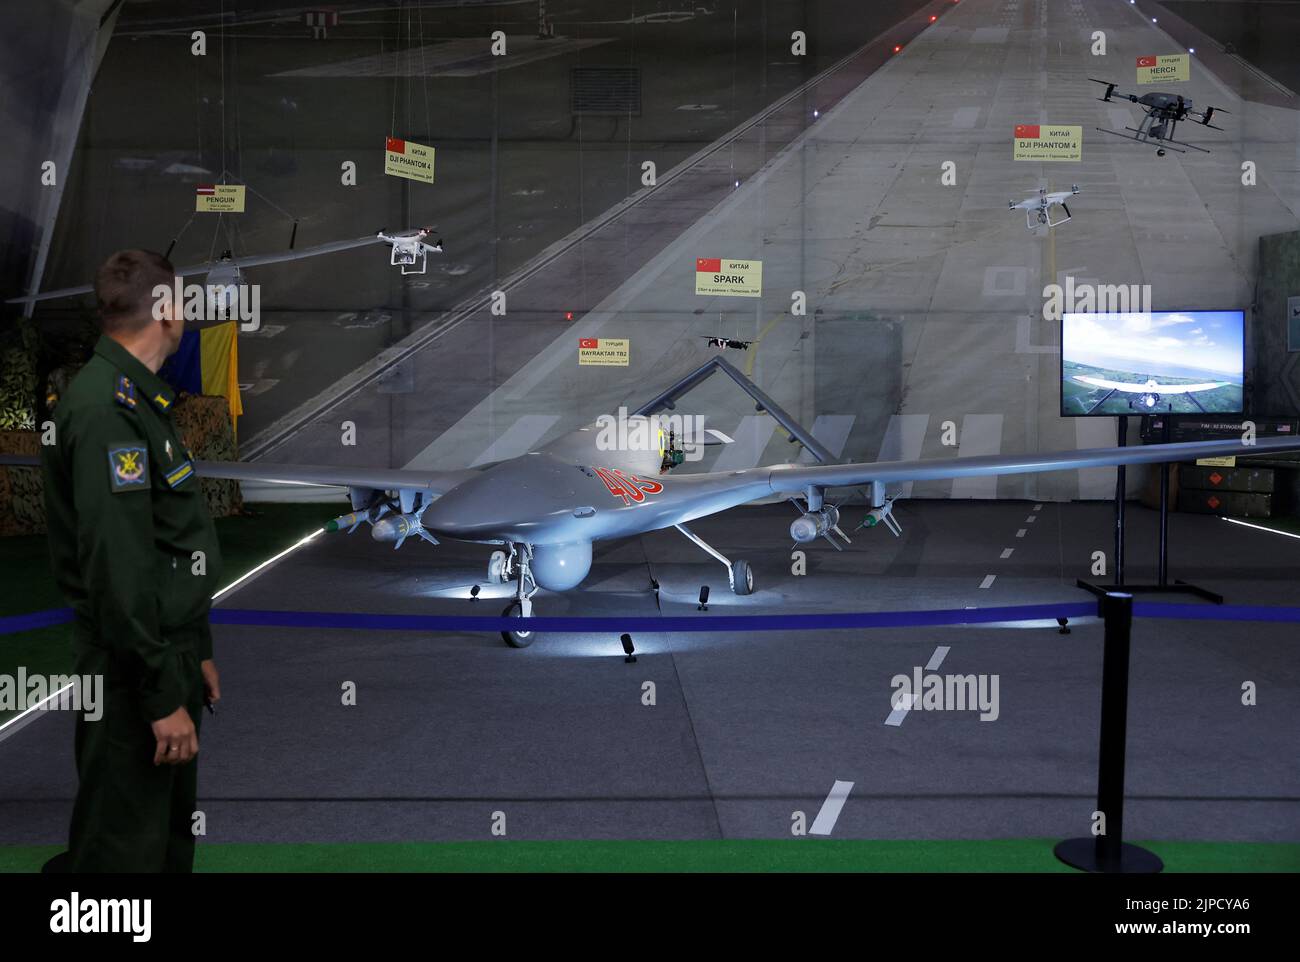 A Bayraktar TB2 combat drone is on display during the exhibition of weaponry and equipment that, according to the Russian defence ministry, were captured during the military conflict in Ukraine, at the international military-technical forum Army-2022 at Patriot Congress and Exhibition Centre in the Moscow region, Russia August 17, 2022. REUTERS/REUTERS PHOTOGRAPHER Stock Photo